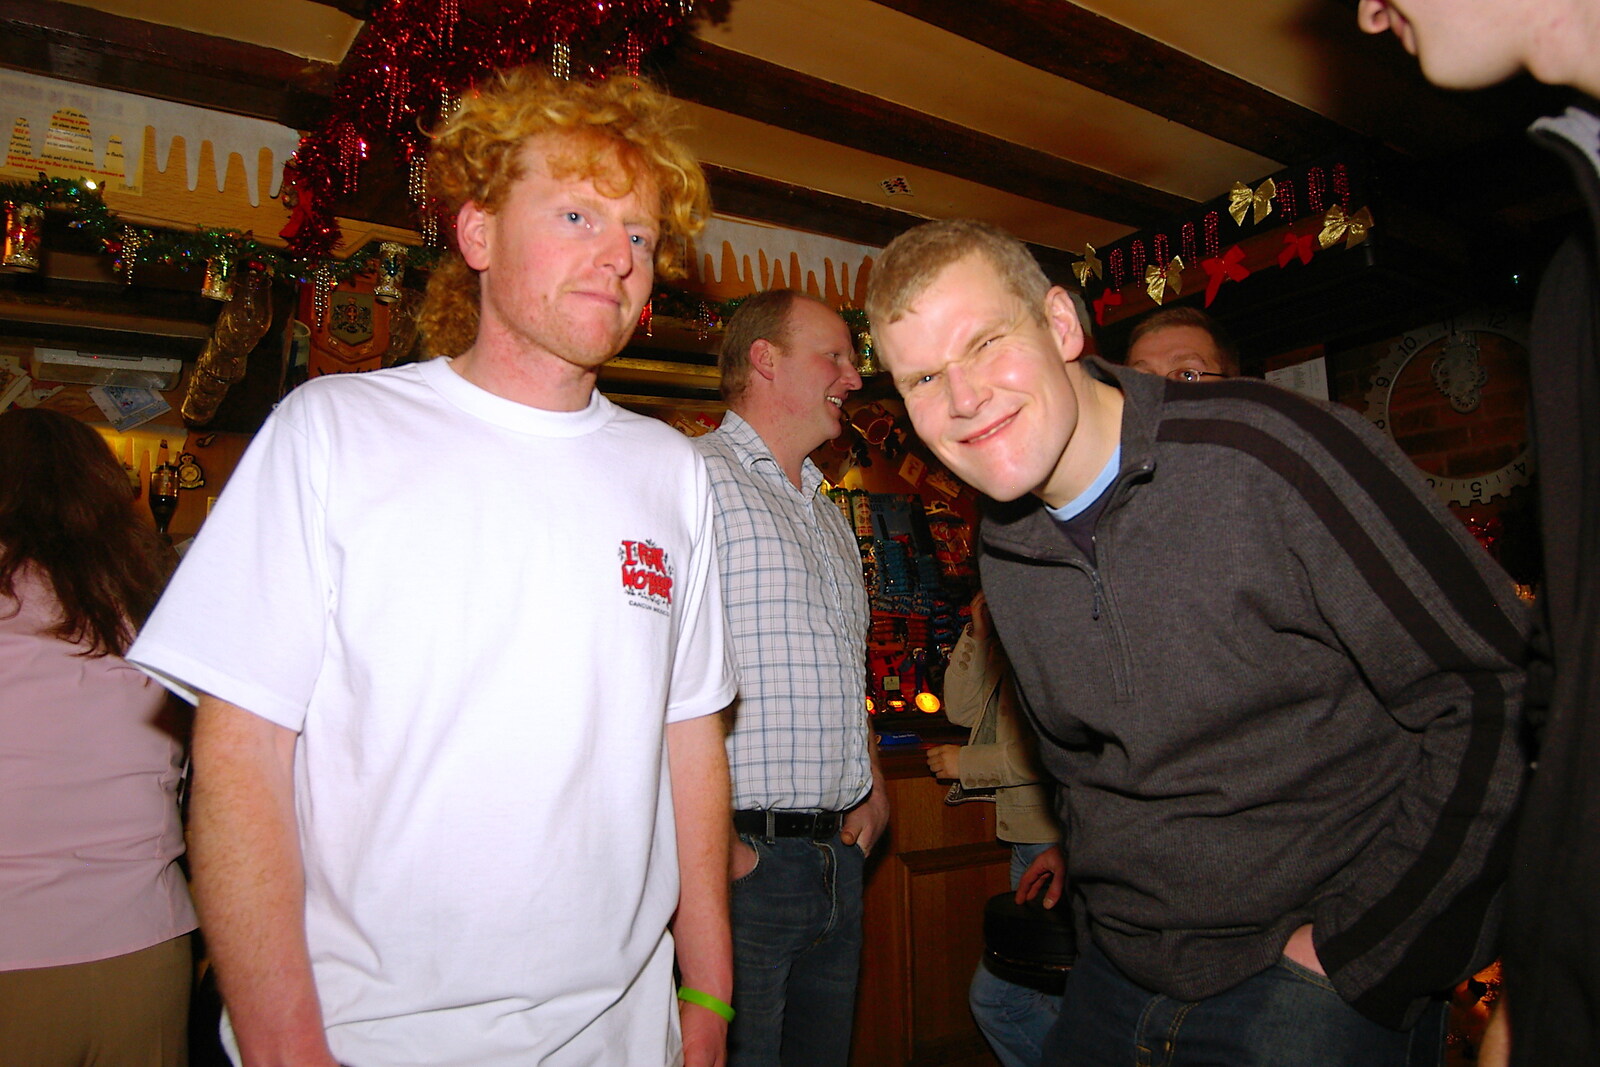 Wavy and Bill (looking strained) from Pre-Christmas Roundup: Wigs, Beers and Kebabs, Diss, Norfolk - 24th December 2005